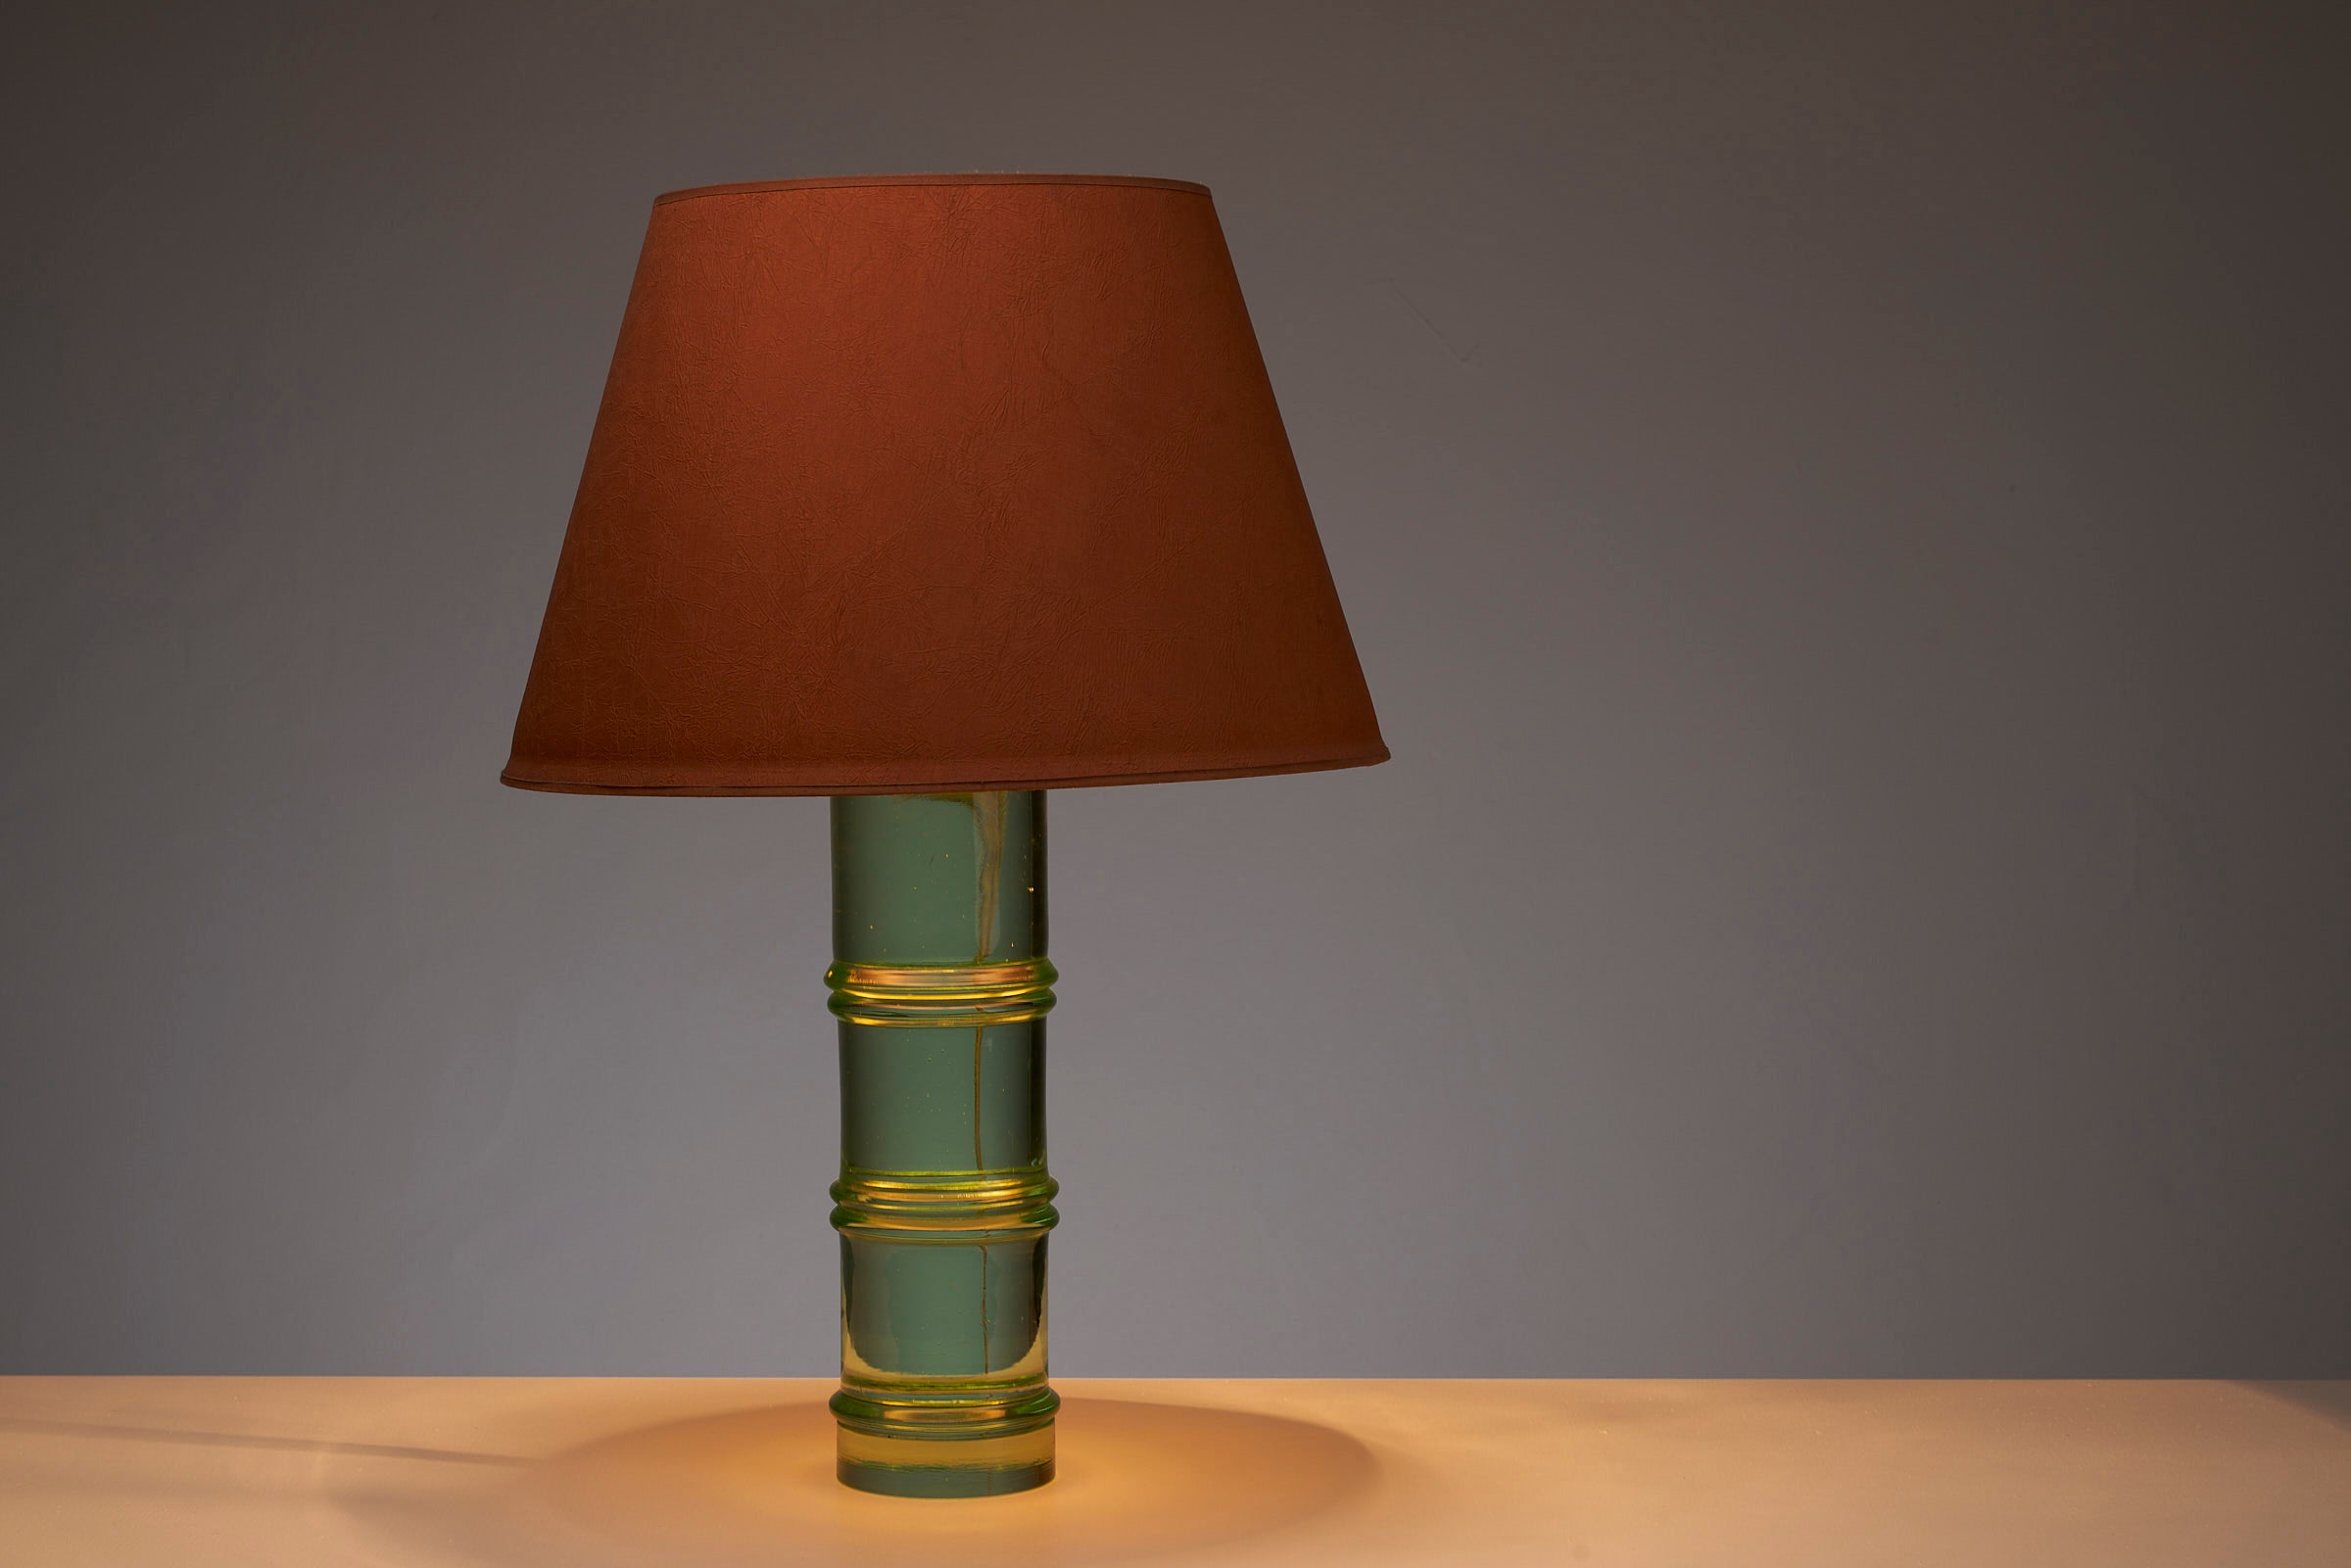 Solid glass table lamp with orange lampshade in the manner of Fontana Arte or Venini